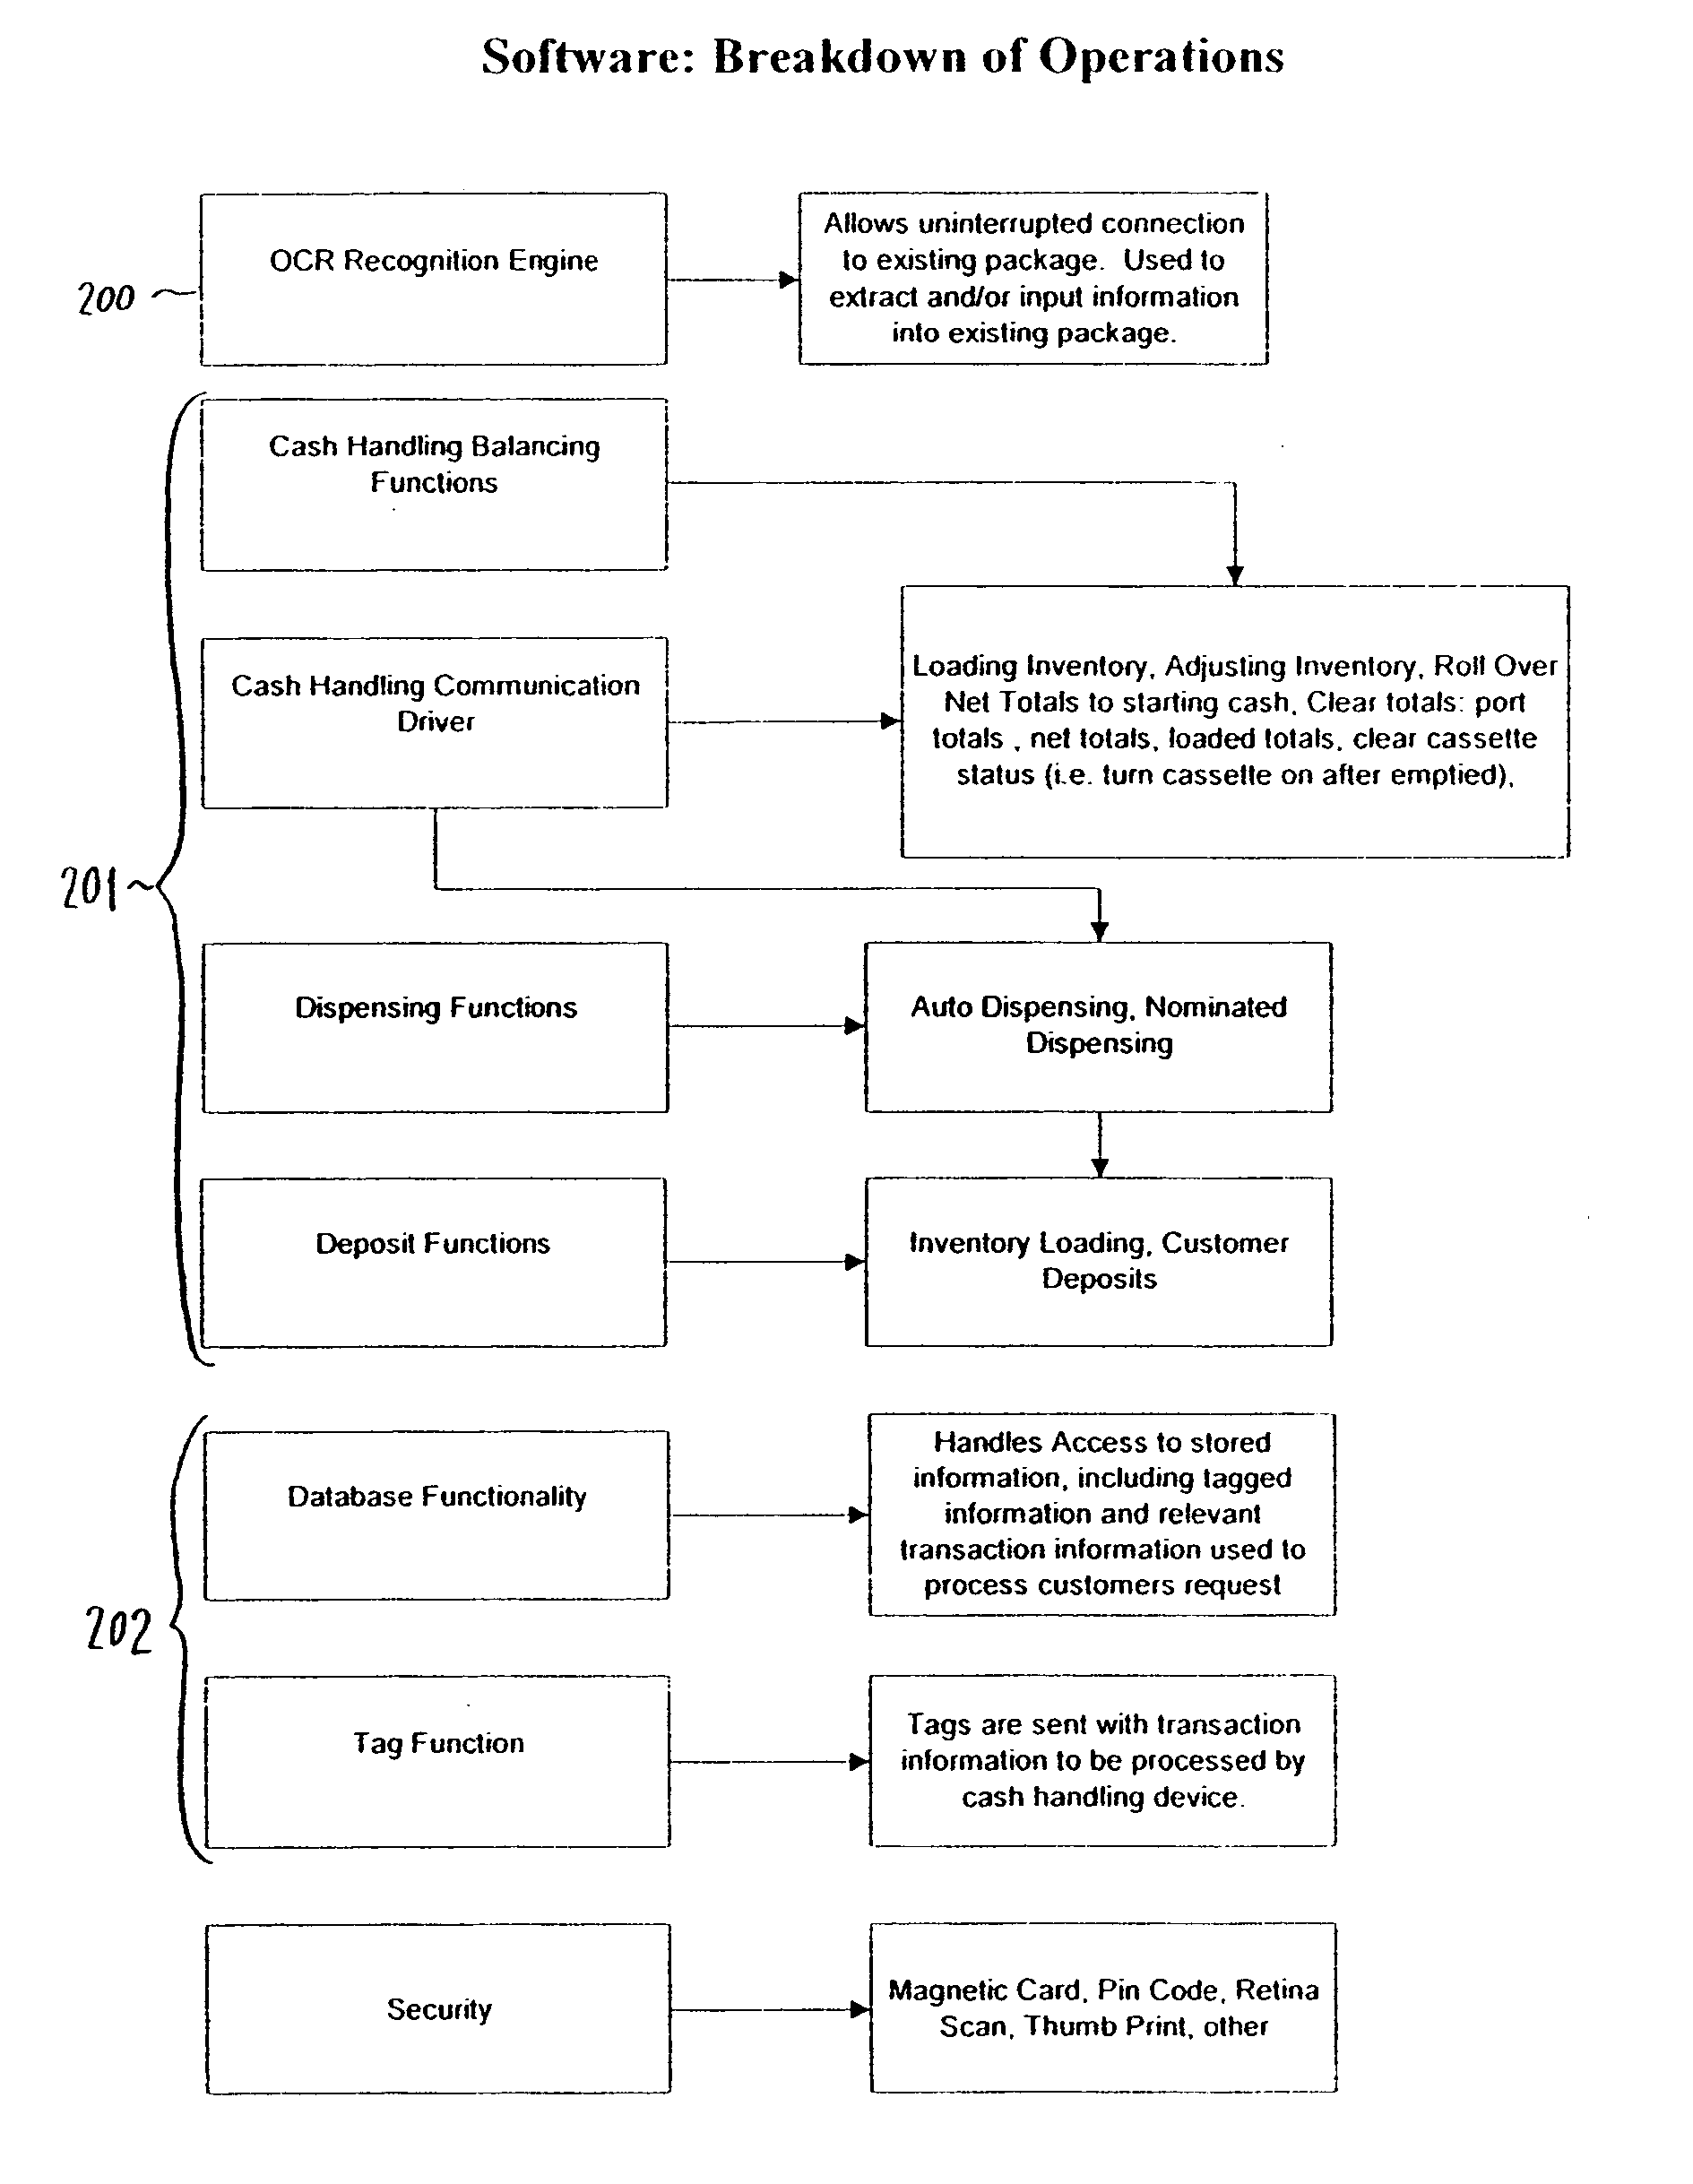 System and method for cash deposit/issuance